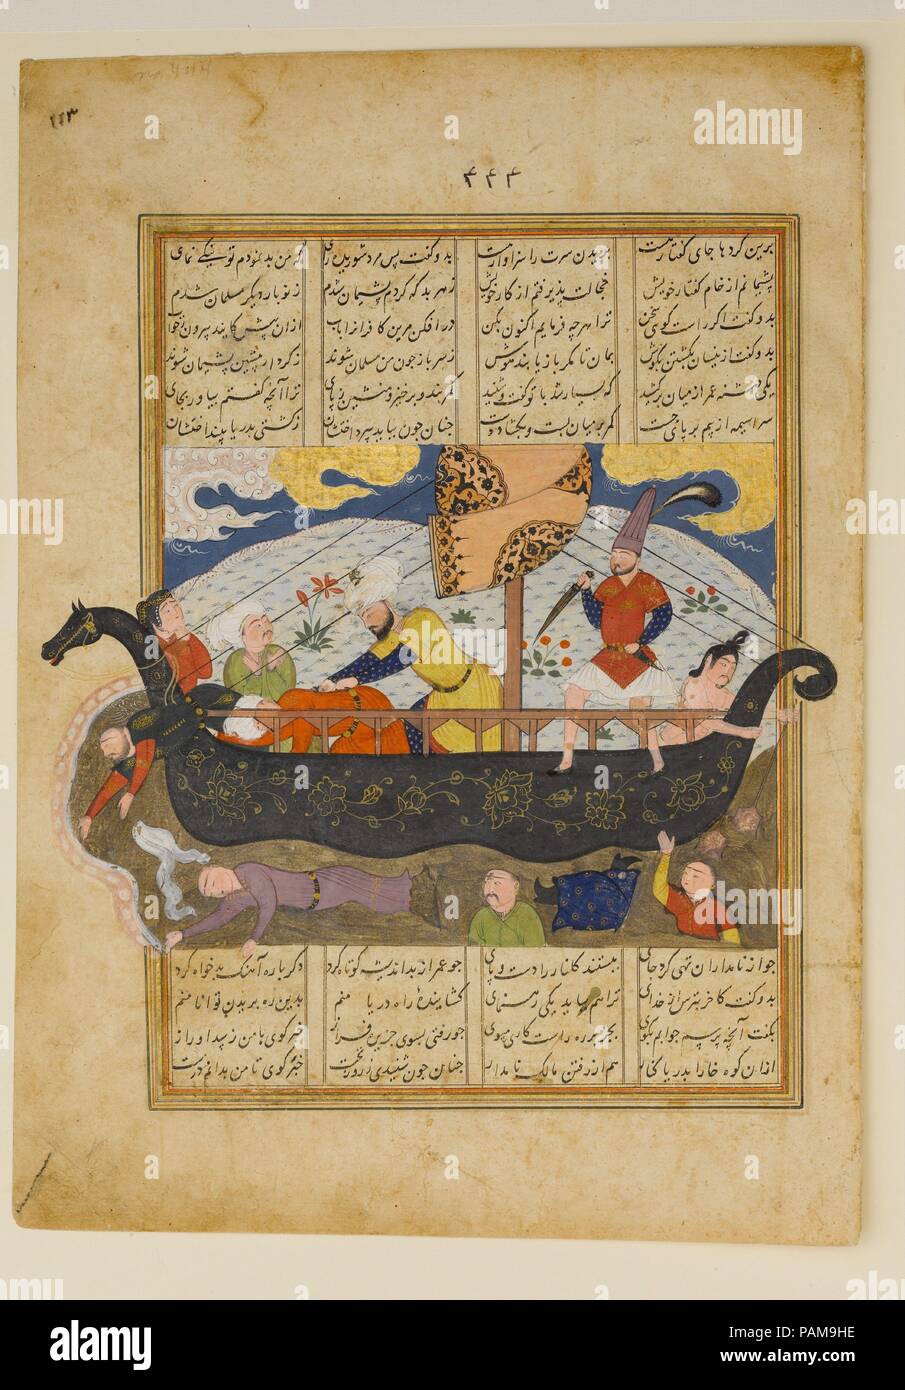 'Amr has the Infidels Thrown into the Sea', Folio from a Khavarannama (The Book of the East) of ibn Husam al-Din. Author: Maulana Muhammad Ibn Husam ad Din (Persian, died 1470). Dimensions: 15 11/16 x 11 1/4in. (39.8 x 28.6cm). Date: ca. 1476-86.  This painting, with its vibrant color palette and lively action, is taken from a manuscript of the Khavarannama (Book of the East), a gathering of tales relating the adventures of 'Ali ibn Abi Talib, son-in-law of the Prophet Muhammad. These mostly imaginary accounts of the exploits of 'Ali and his companions against demons, dragons, and kings were c Stock Photo